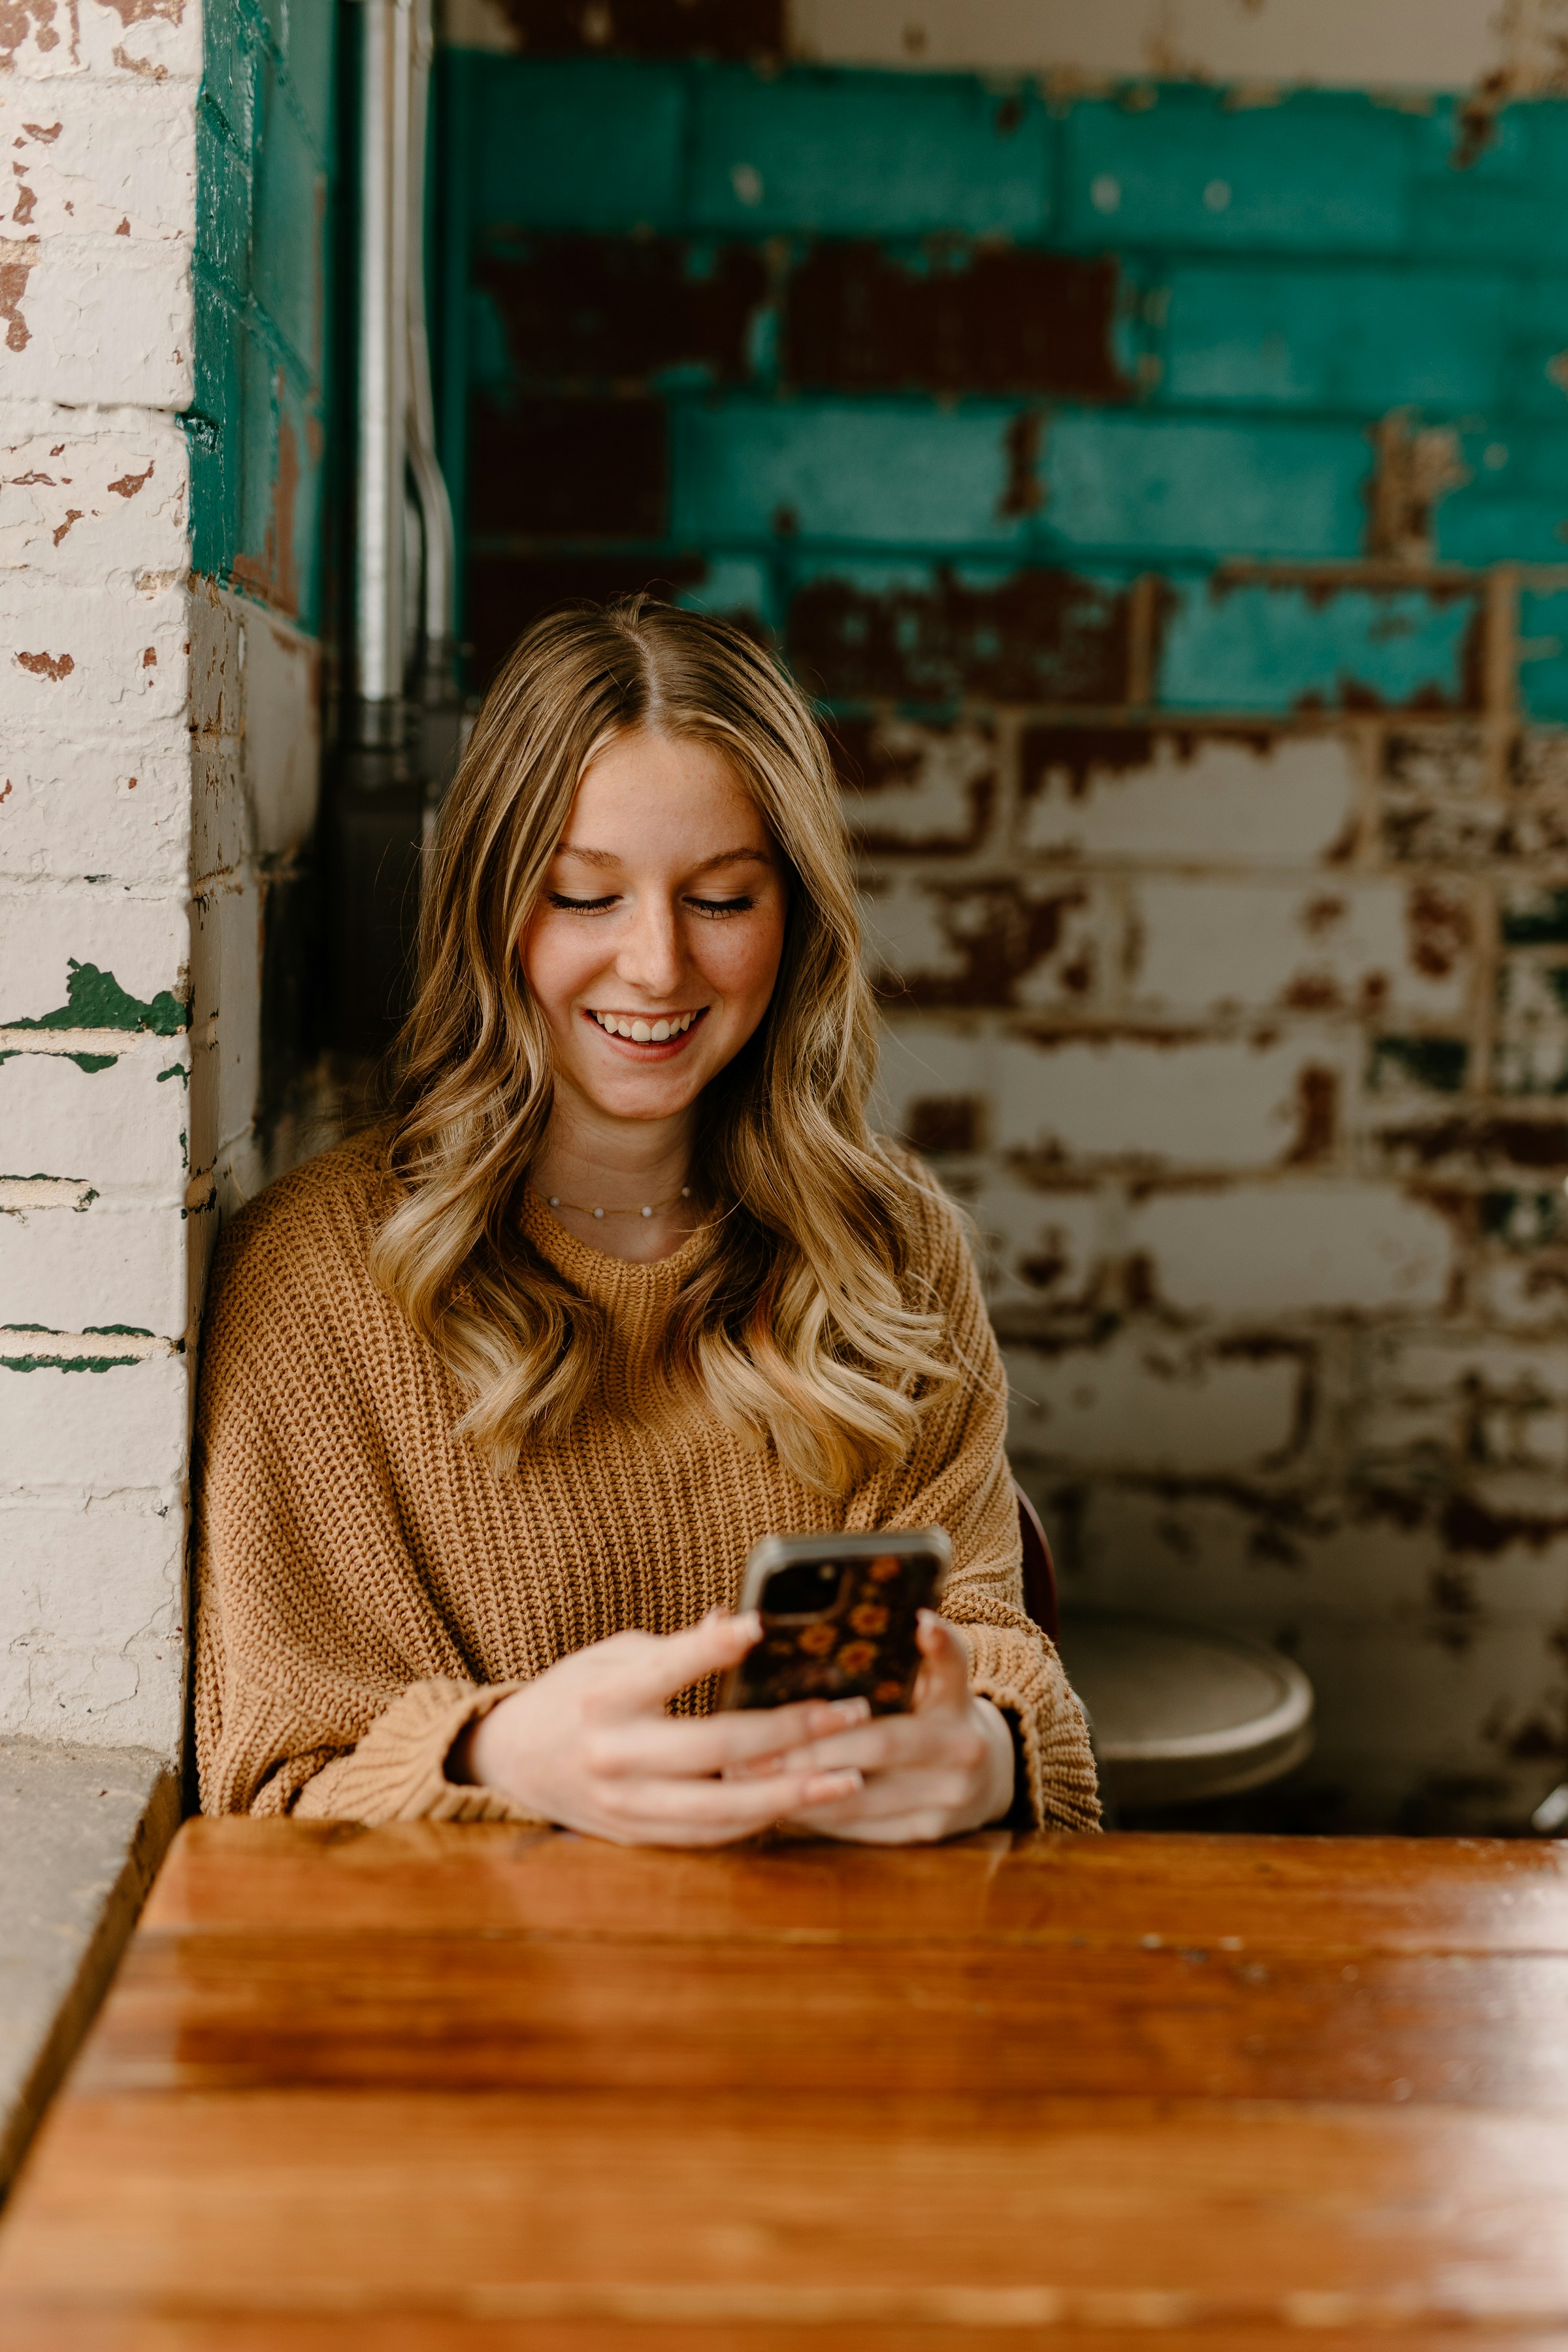 A woman smiling while texting on her phone | Source: Unsplash